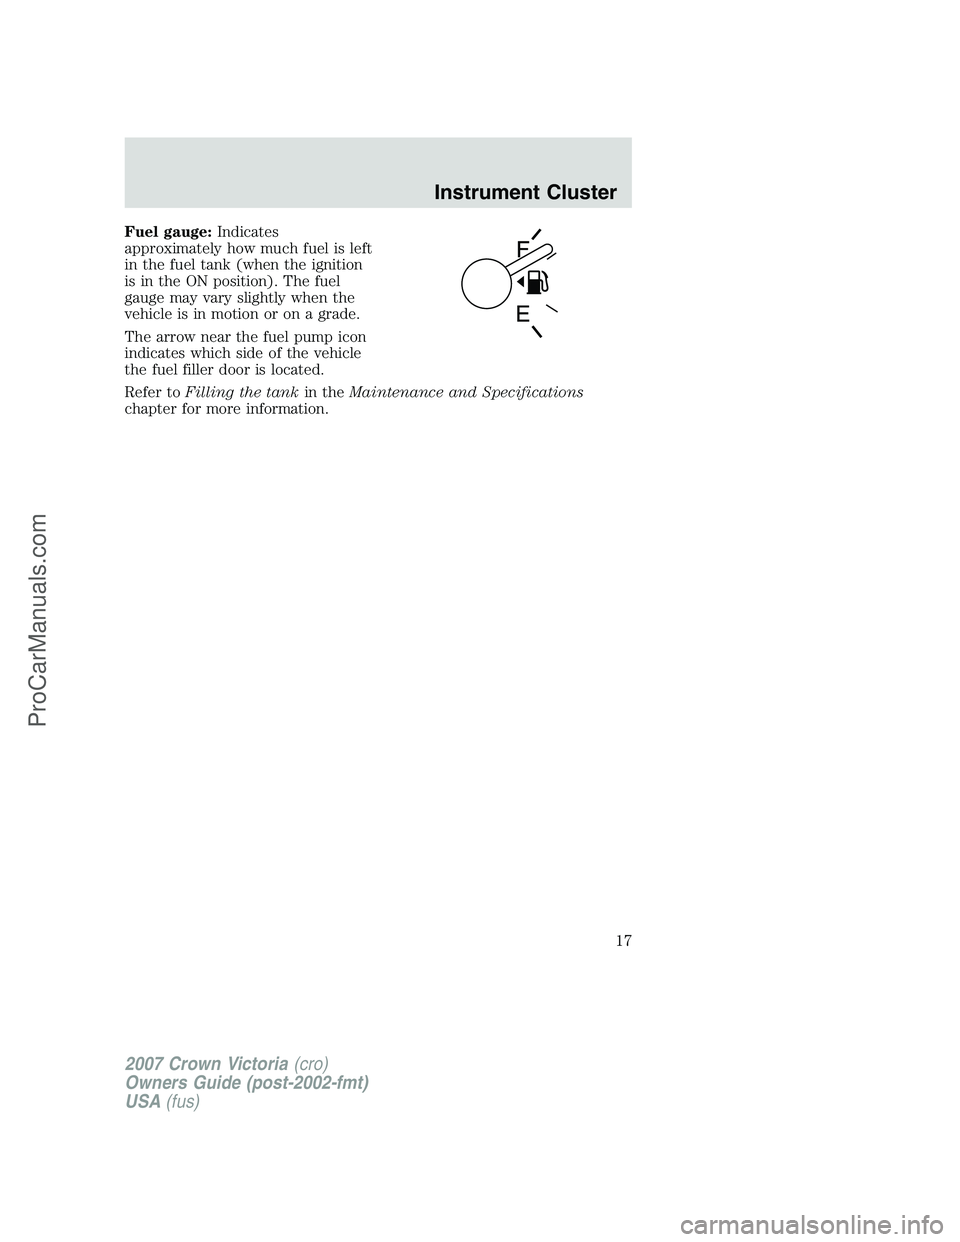 FORD E-450 2007  Owners Manual Fuel gauge:Indicates
approximately how much fuel is left
in the fuel tank (when the ignition
is in the ON position). The fuel
gauge may vary slightly when the
vehicle is in motion or on a grade.
The a